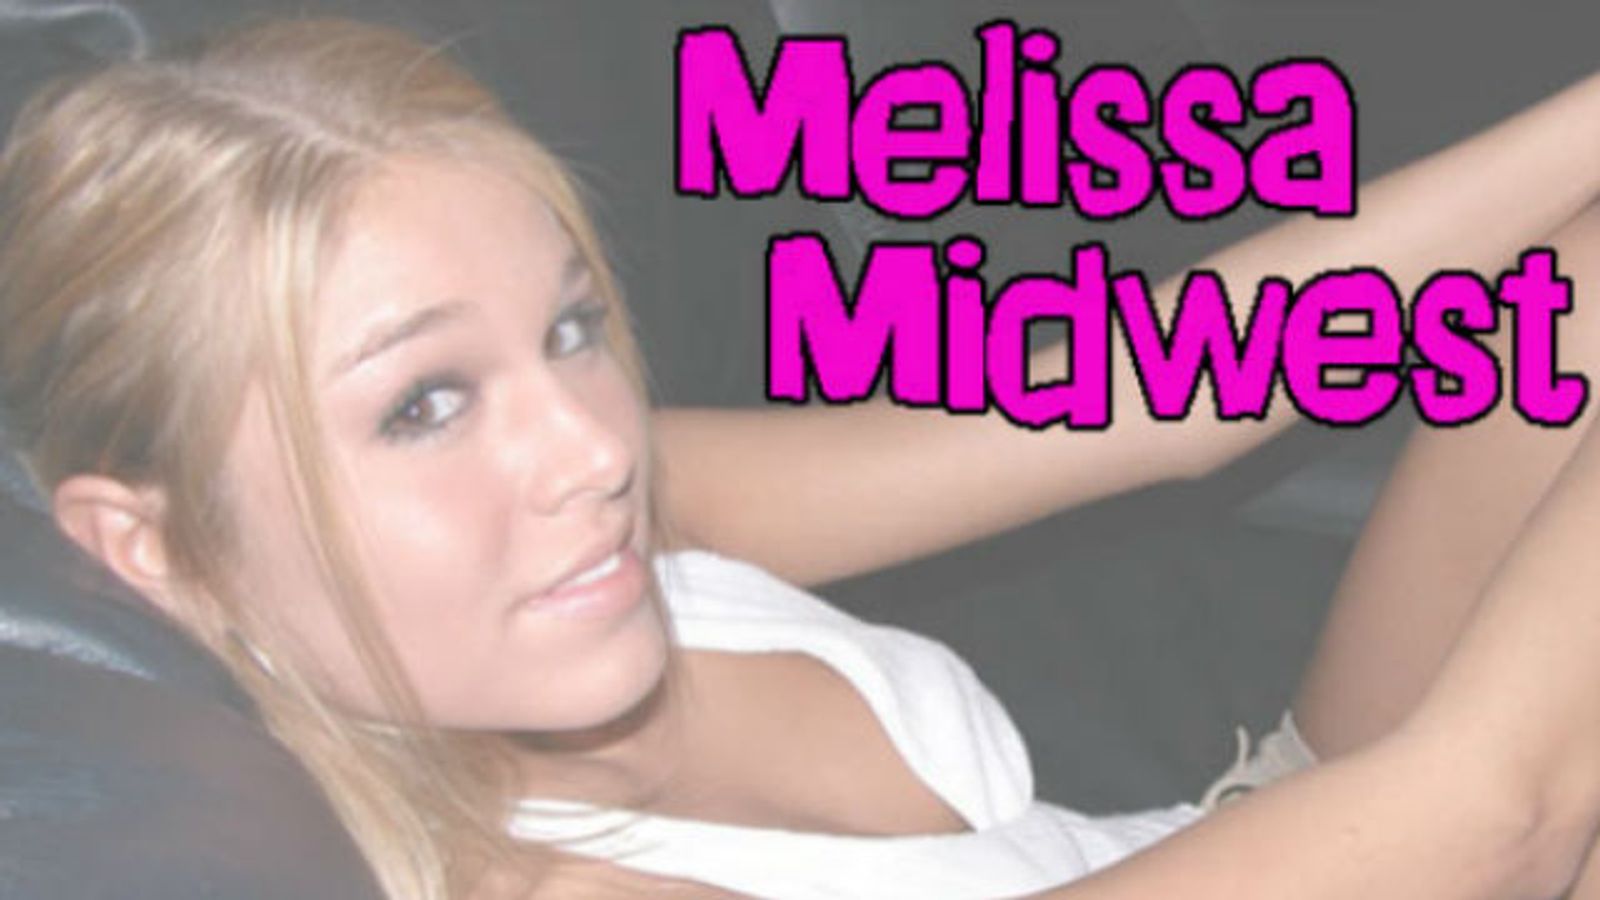 Melissa Midwest Withdraws from Match.com Lawsuit | AVN